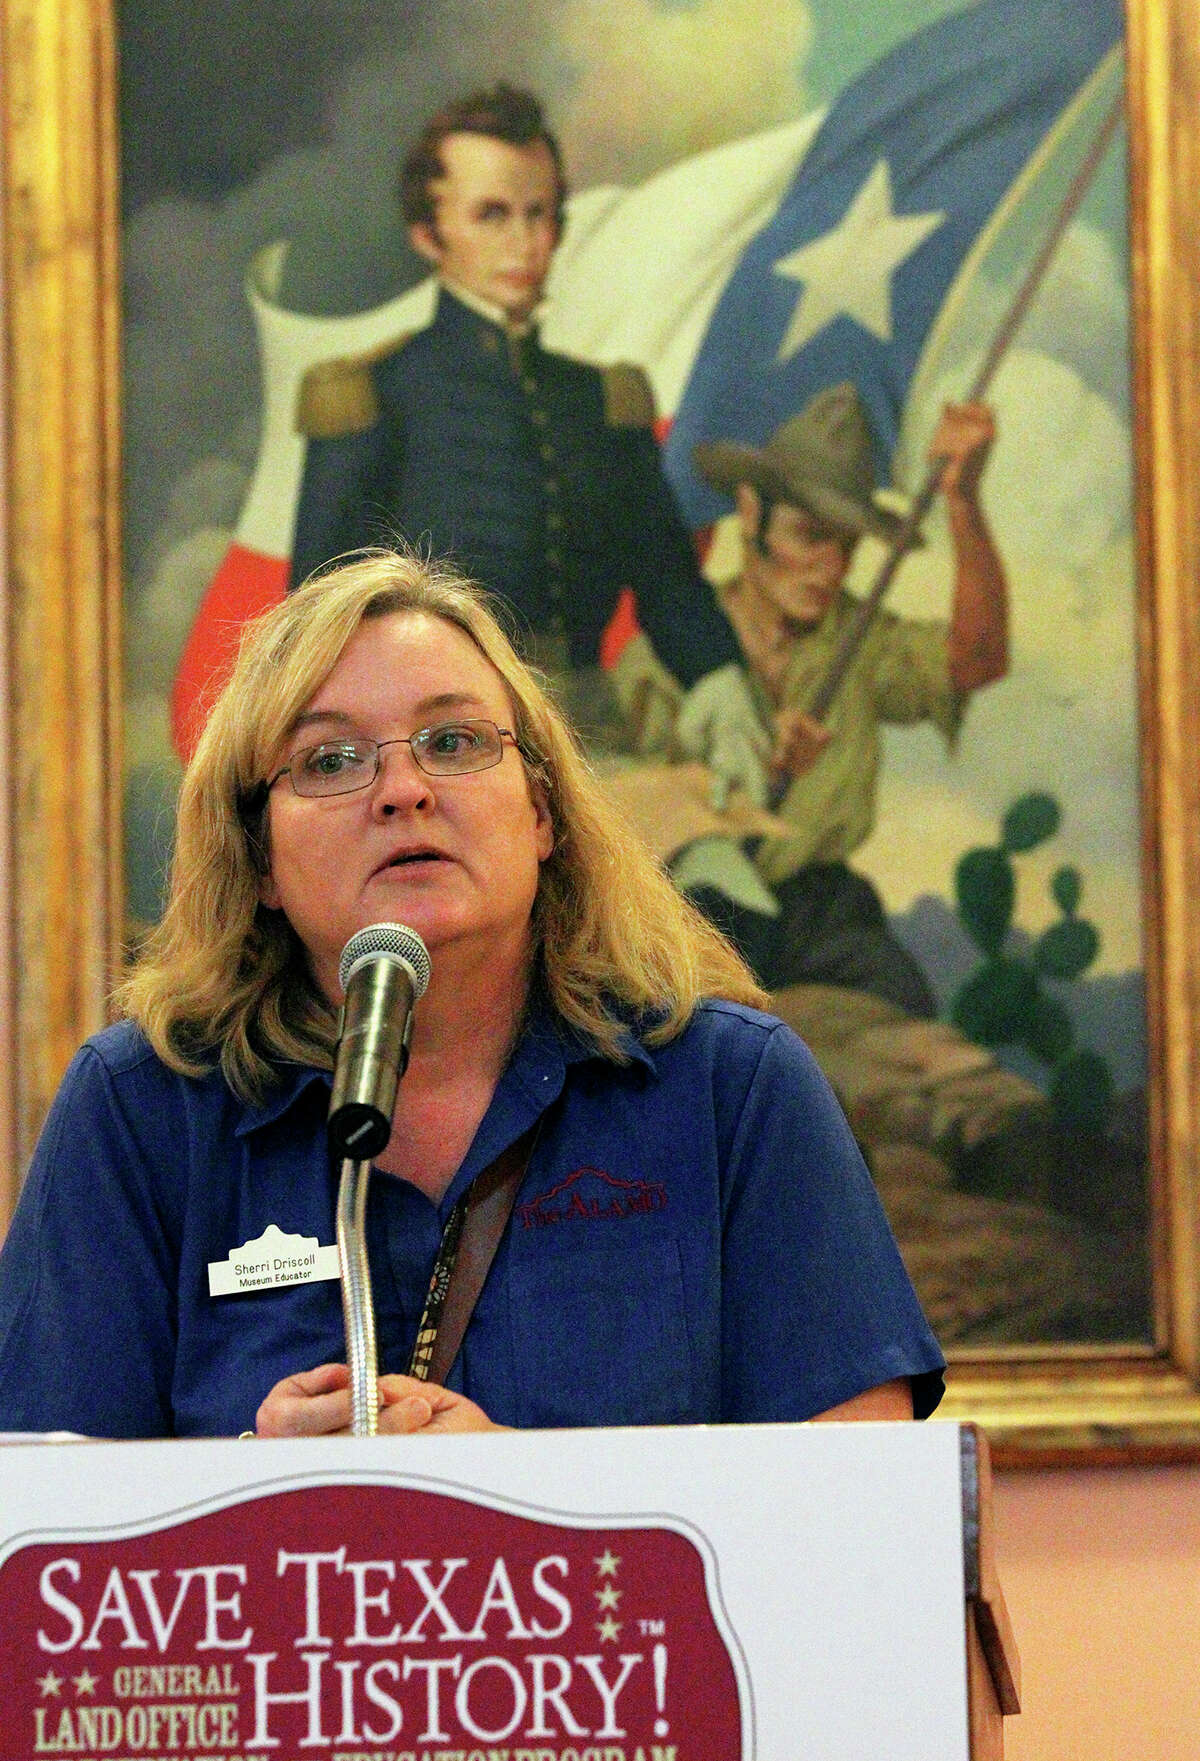 Sherri Driscoll, Museum Educator, starts visitors on a tour during the Save Texas History symposium hosted by theTexas General Land Office on September 7, 2013.